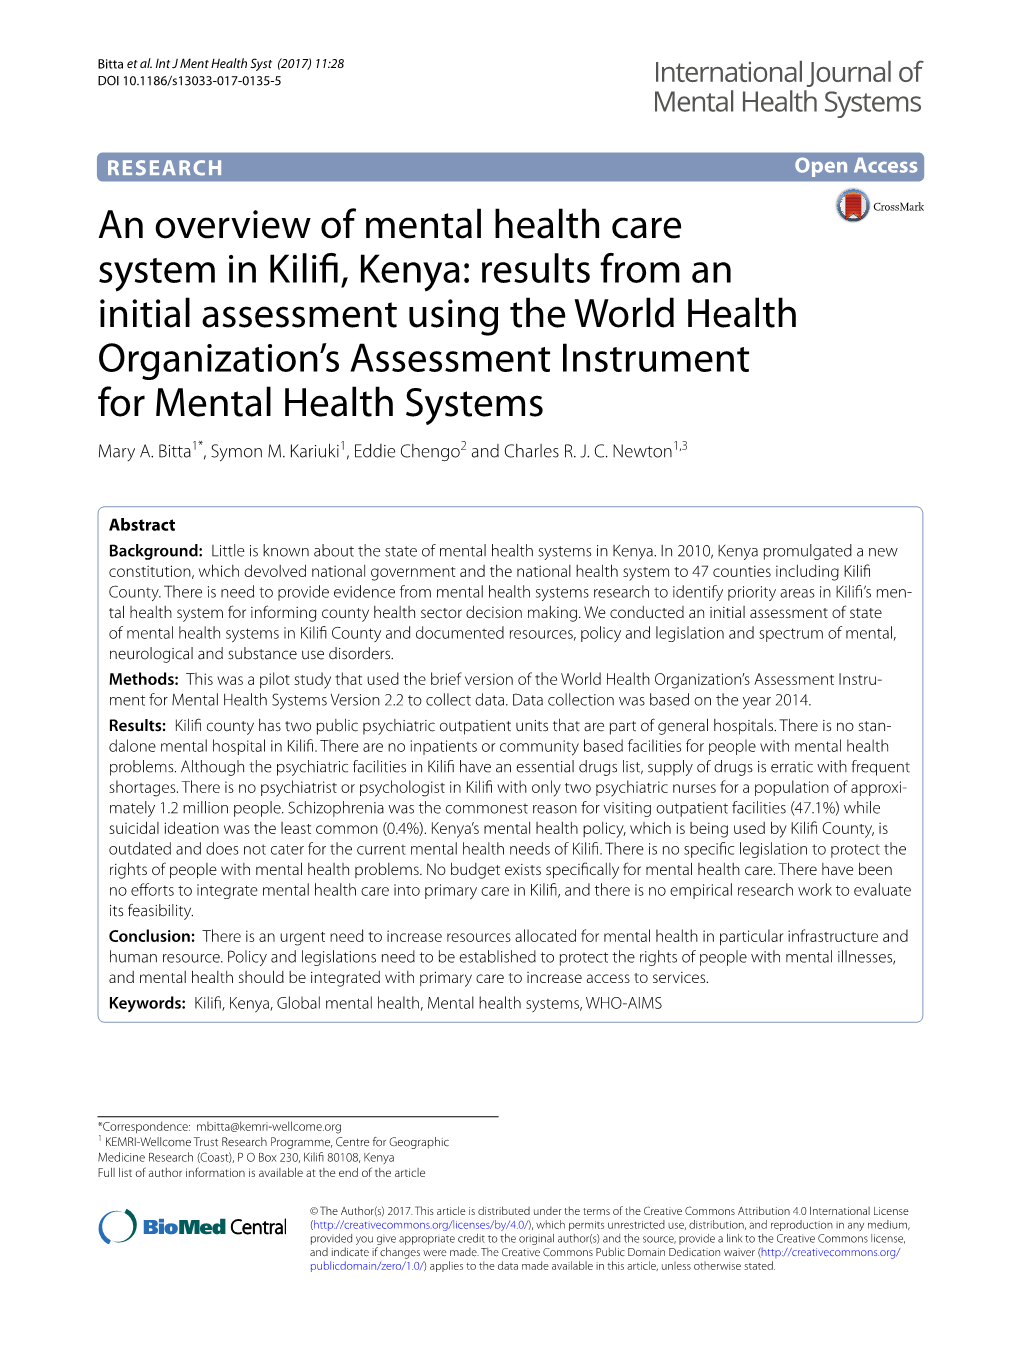 An Overview of Mental Health Care System in Kilifi, Kenya